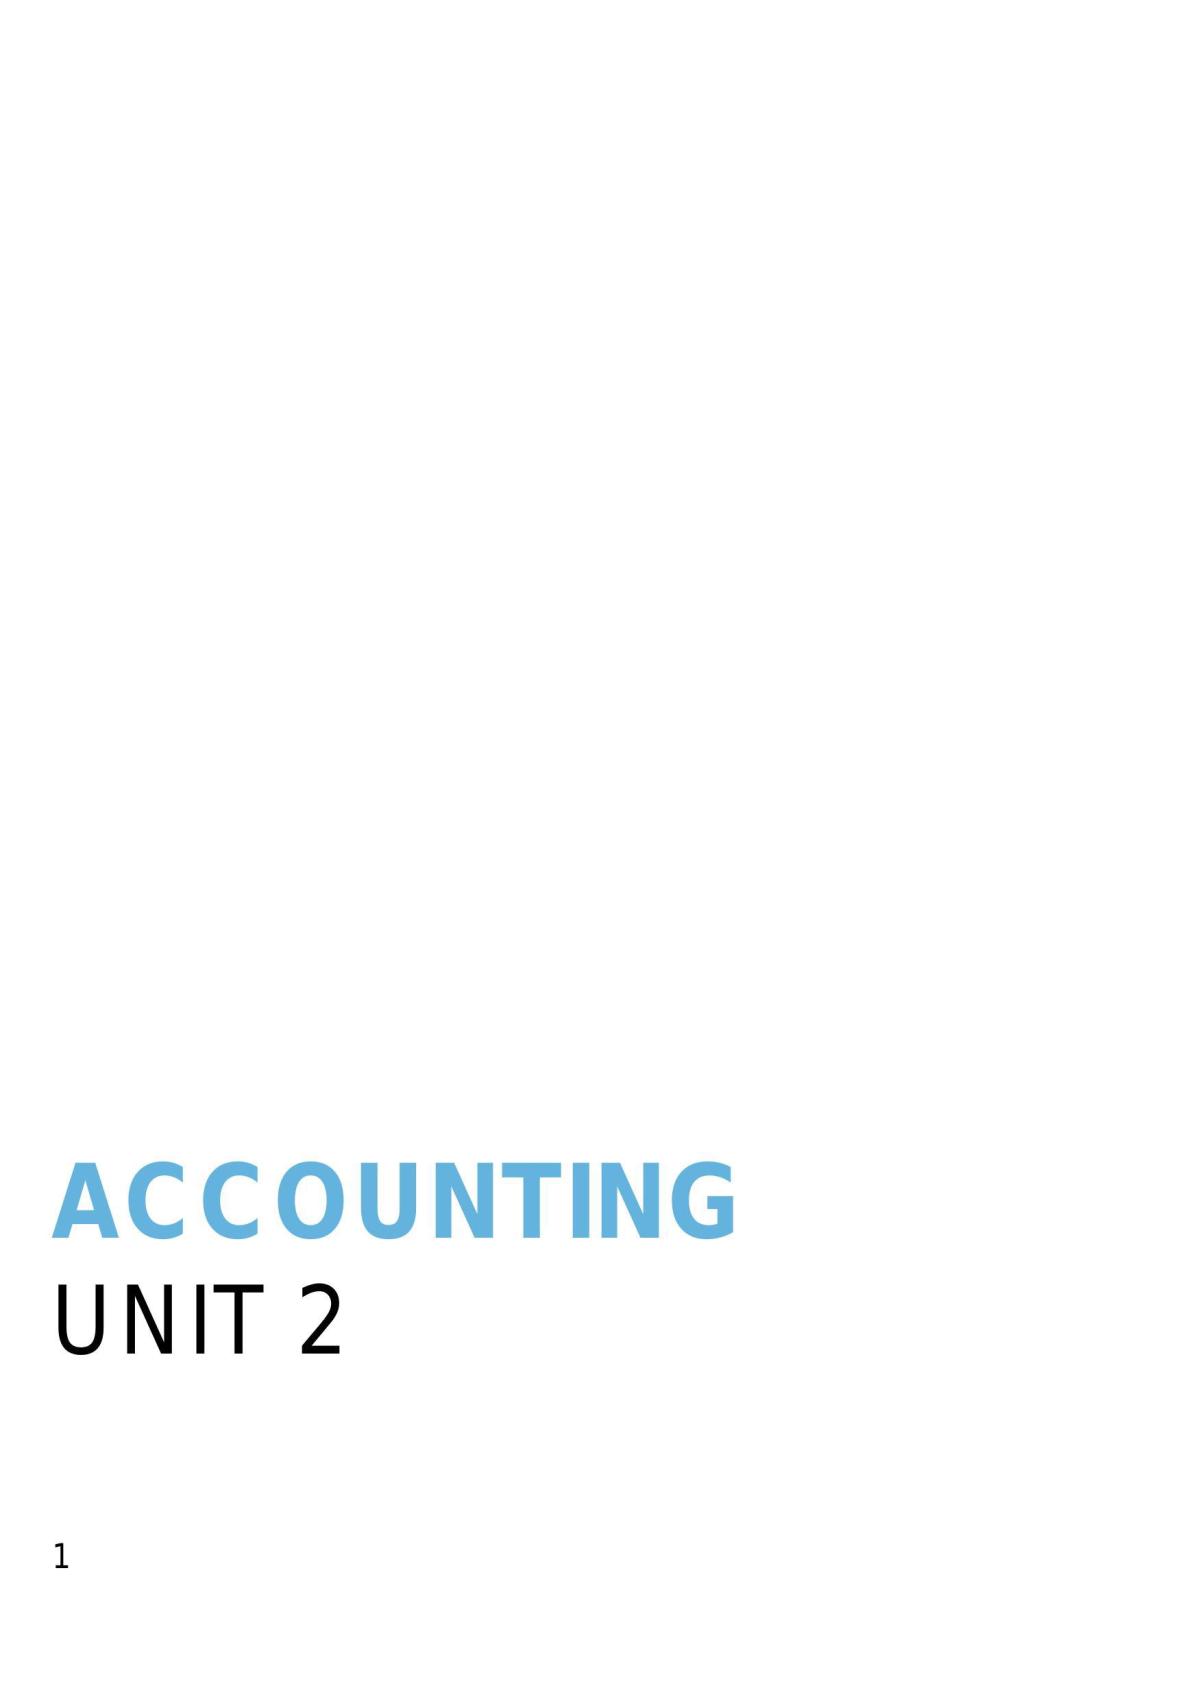 Unit 2 Accounting Notes (Complete) - Page 1